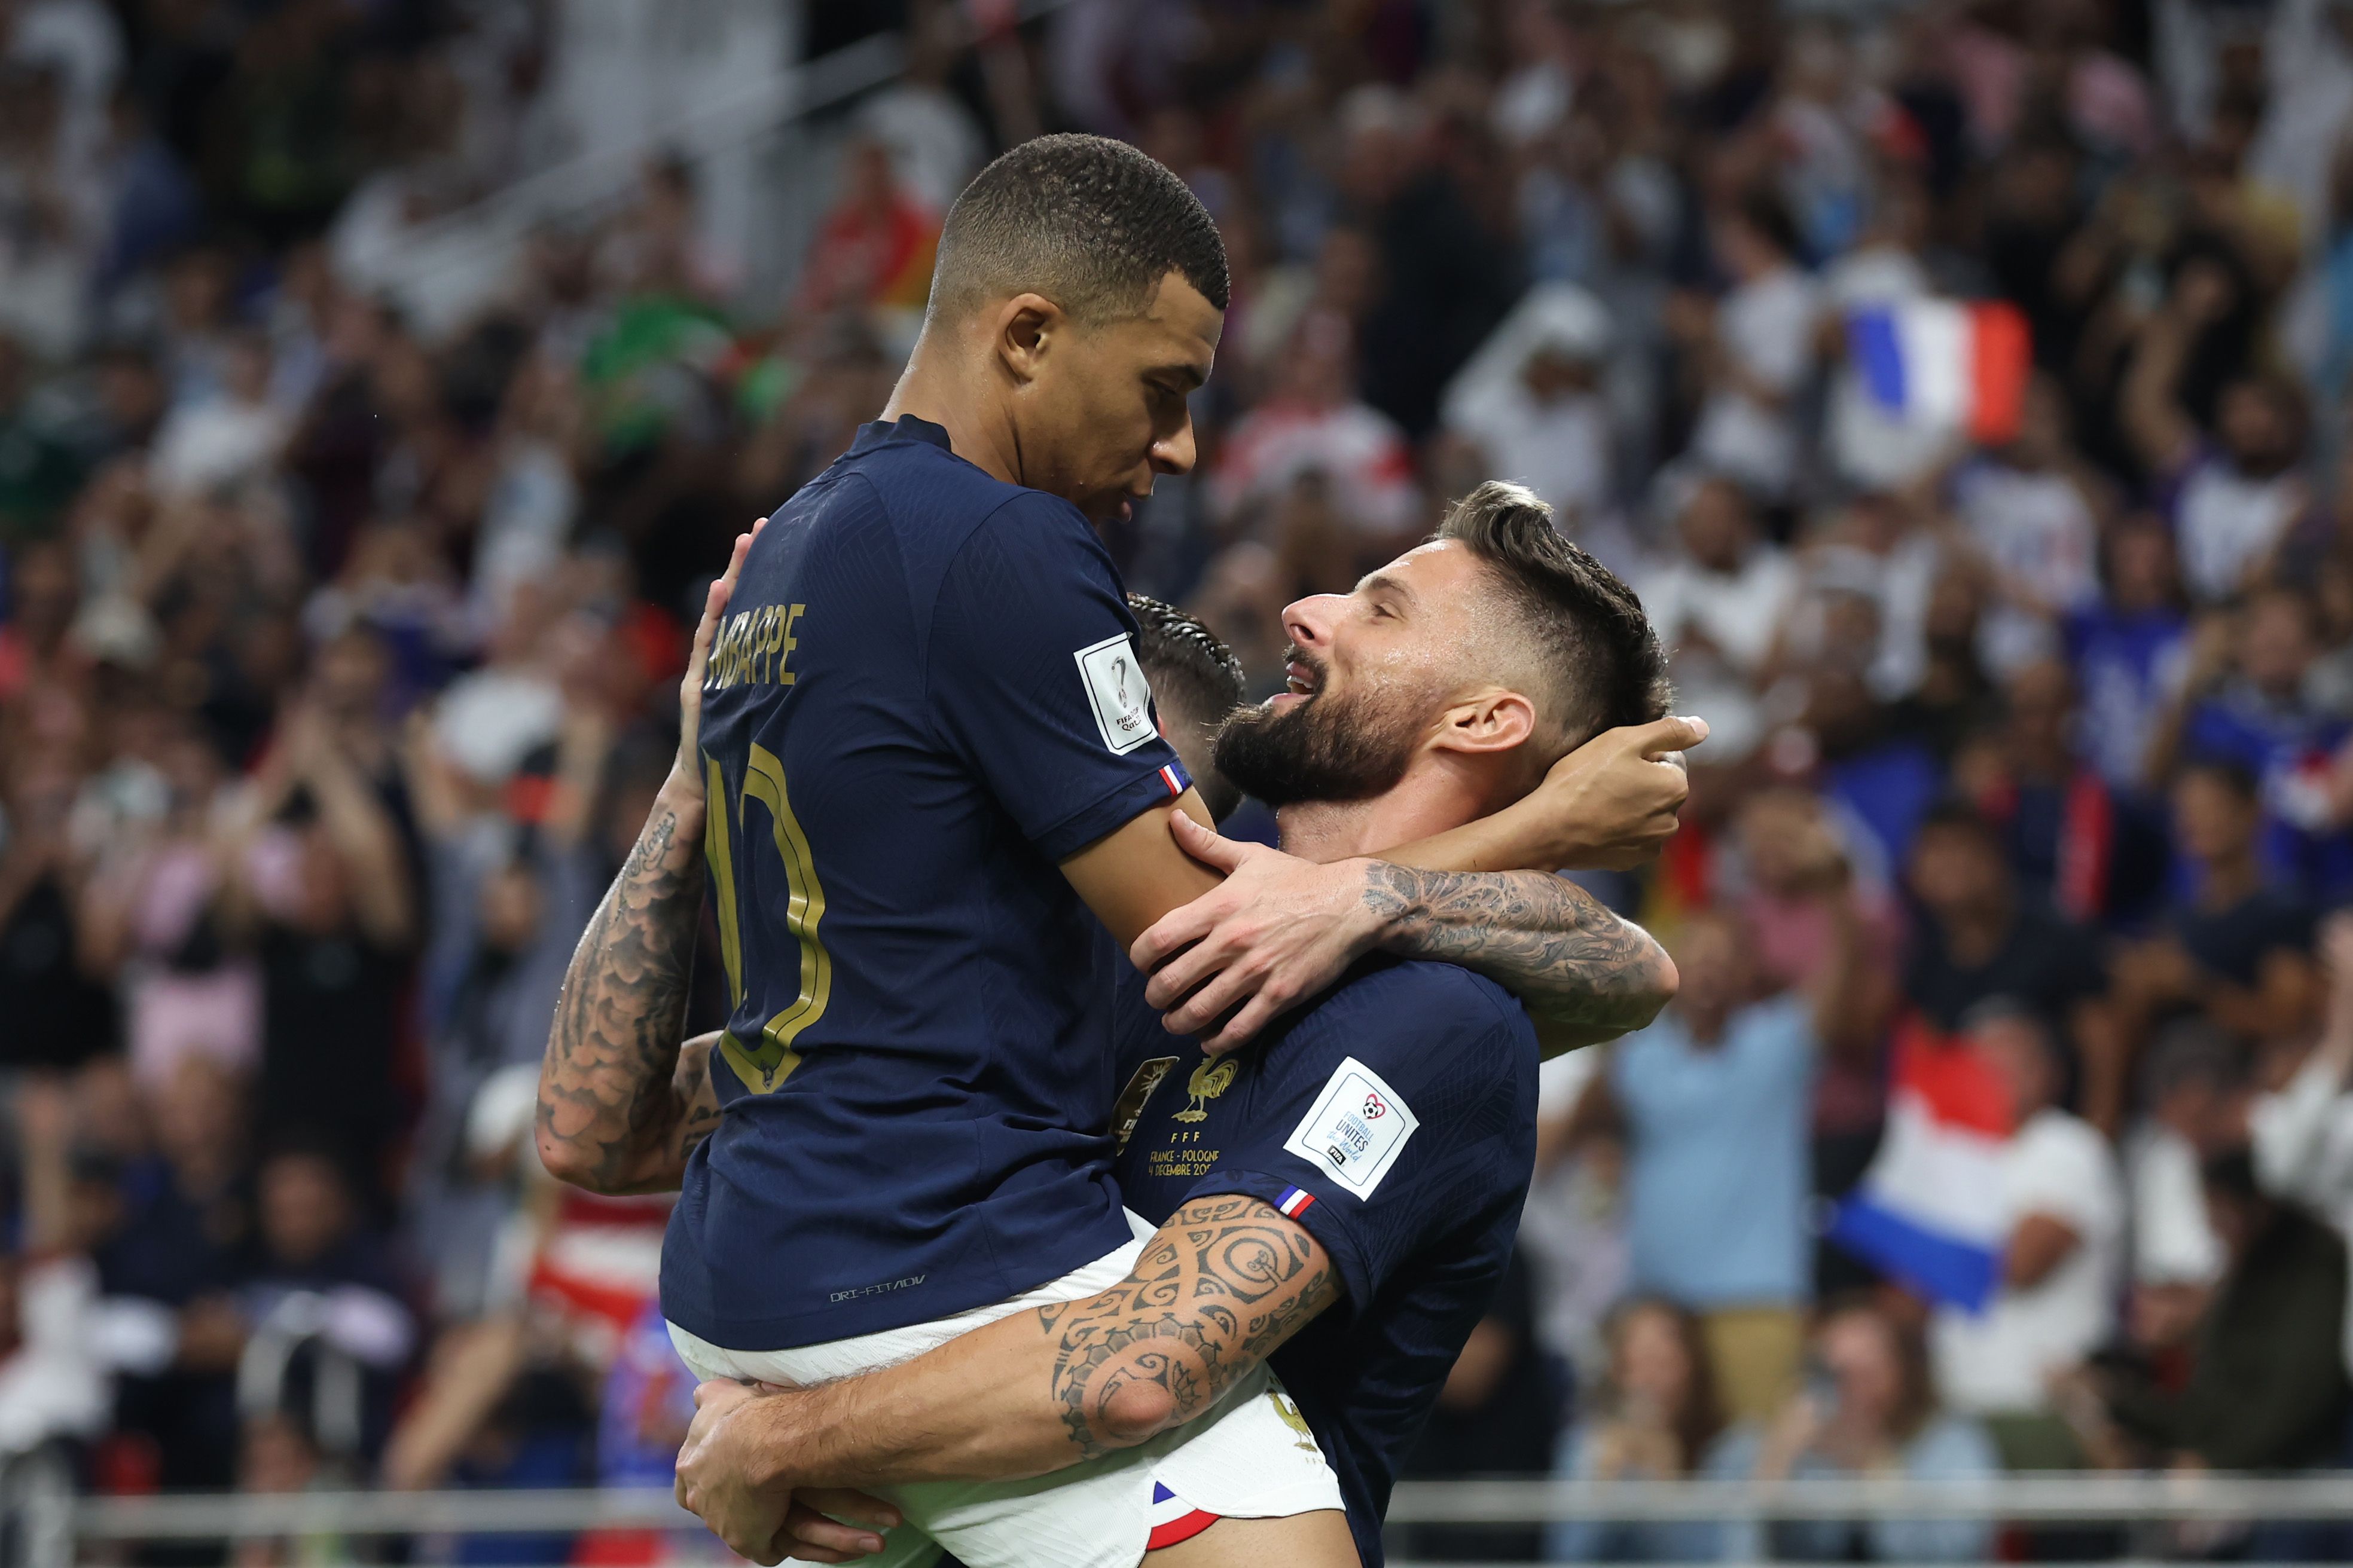 Olivier Giroud of France celebrates with teammates Kylian Mbappe after scoring the team's first goal during the FIFA World Cup Qatar 2022 Round of 16 match between France and Poland at Al Thumama Stadium on December 04, 2022 in Doha, Qatar.